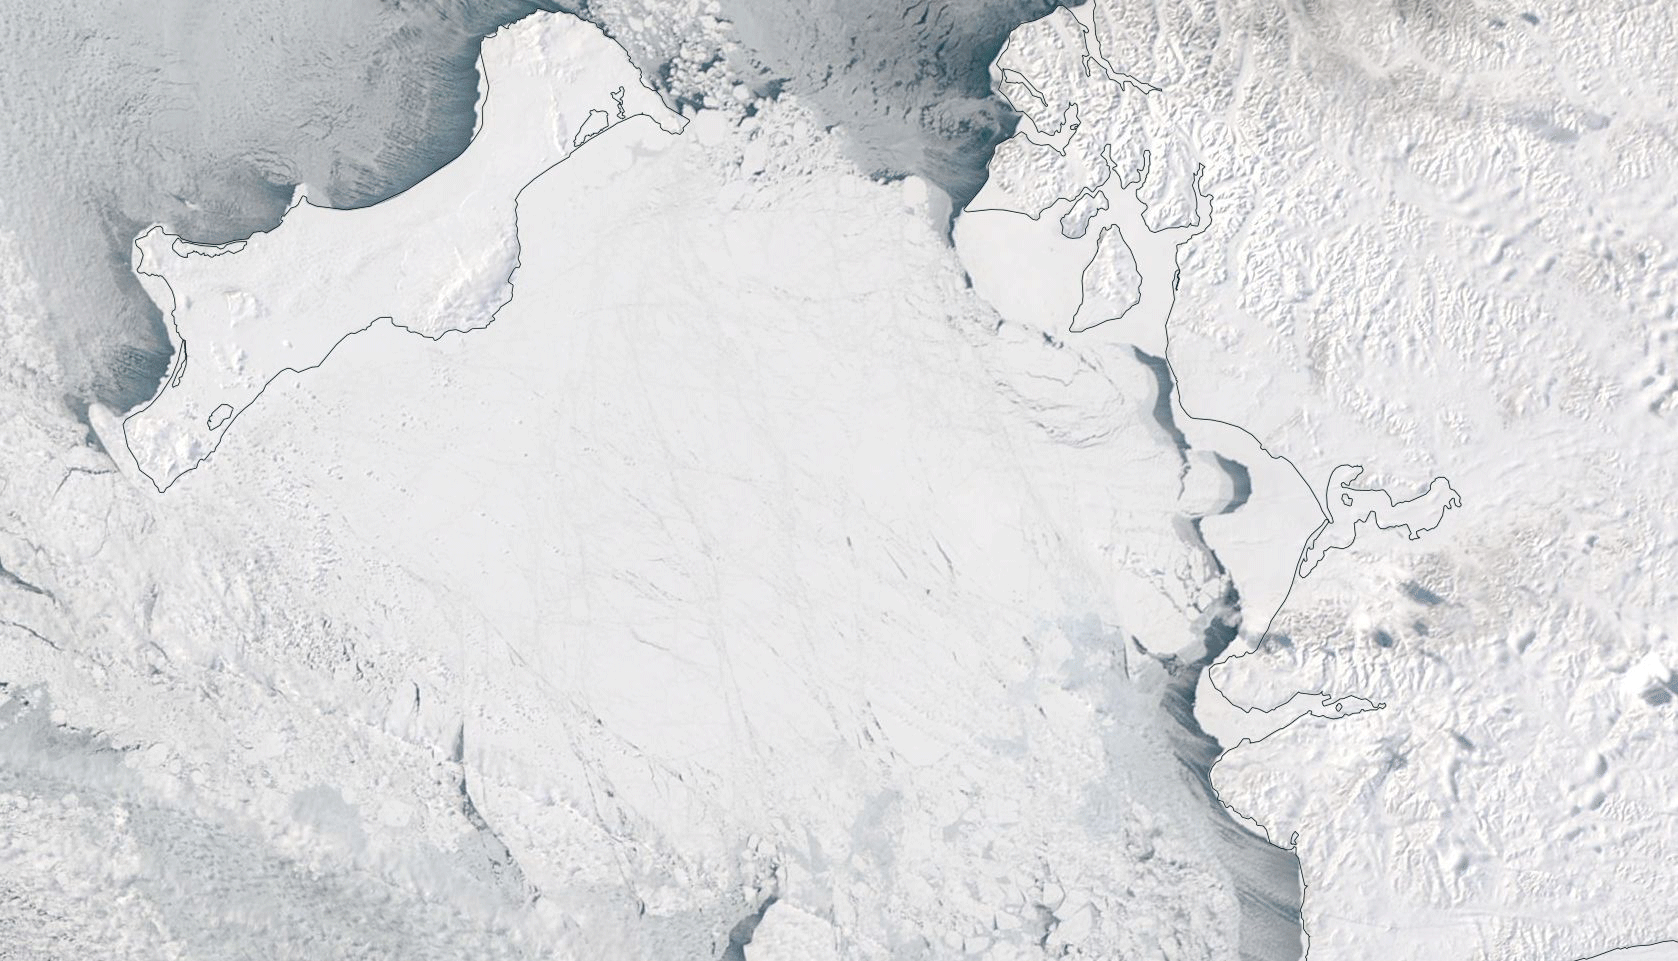 A comparison of Terra satellite images focusing on the area near the Bering Strait between Alaska and Russia. In the image acquired on March 24, 2000, the sea is choked with floating ice. In the one acquired on March 25, 2018, there is dramatically less ice coverage. (Images: NASA Worldview. Animation: Tom Yulsman)